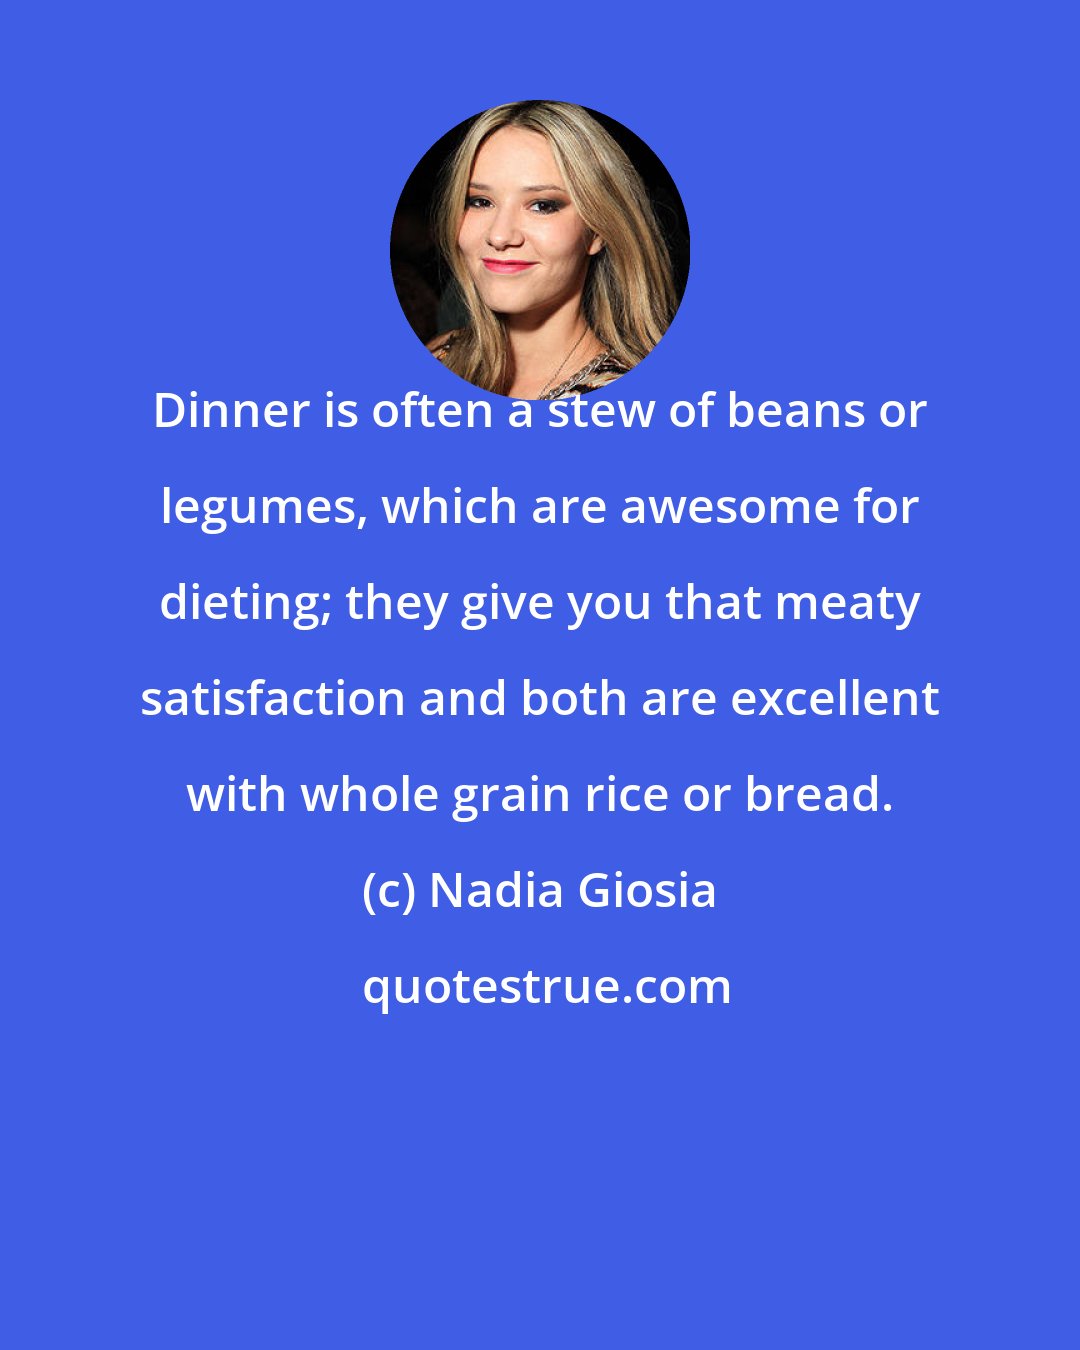 Nadia Giosia: Dinner is often a stew of beans or legumes, which are awesome for dieting; they give you that meaty satisfaction and both are excellent with whole grain rice or bread.